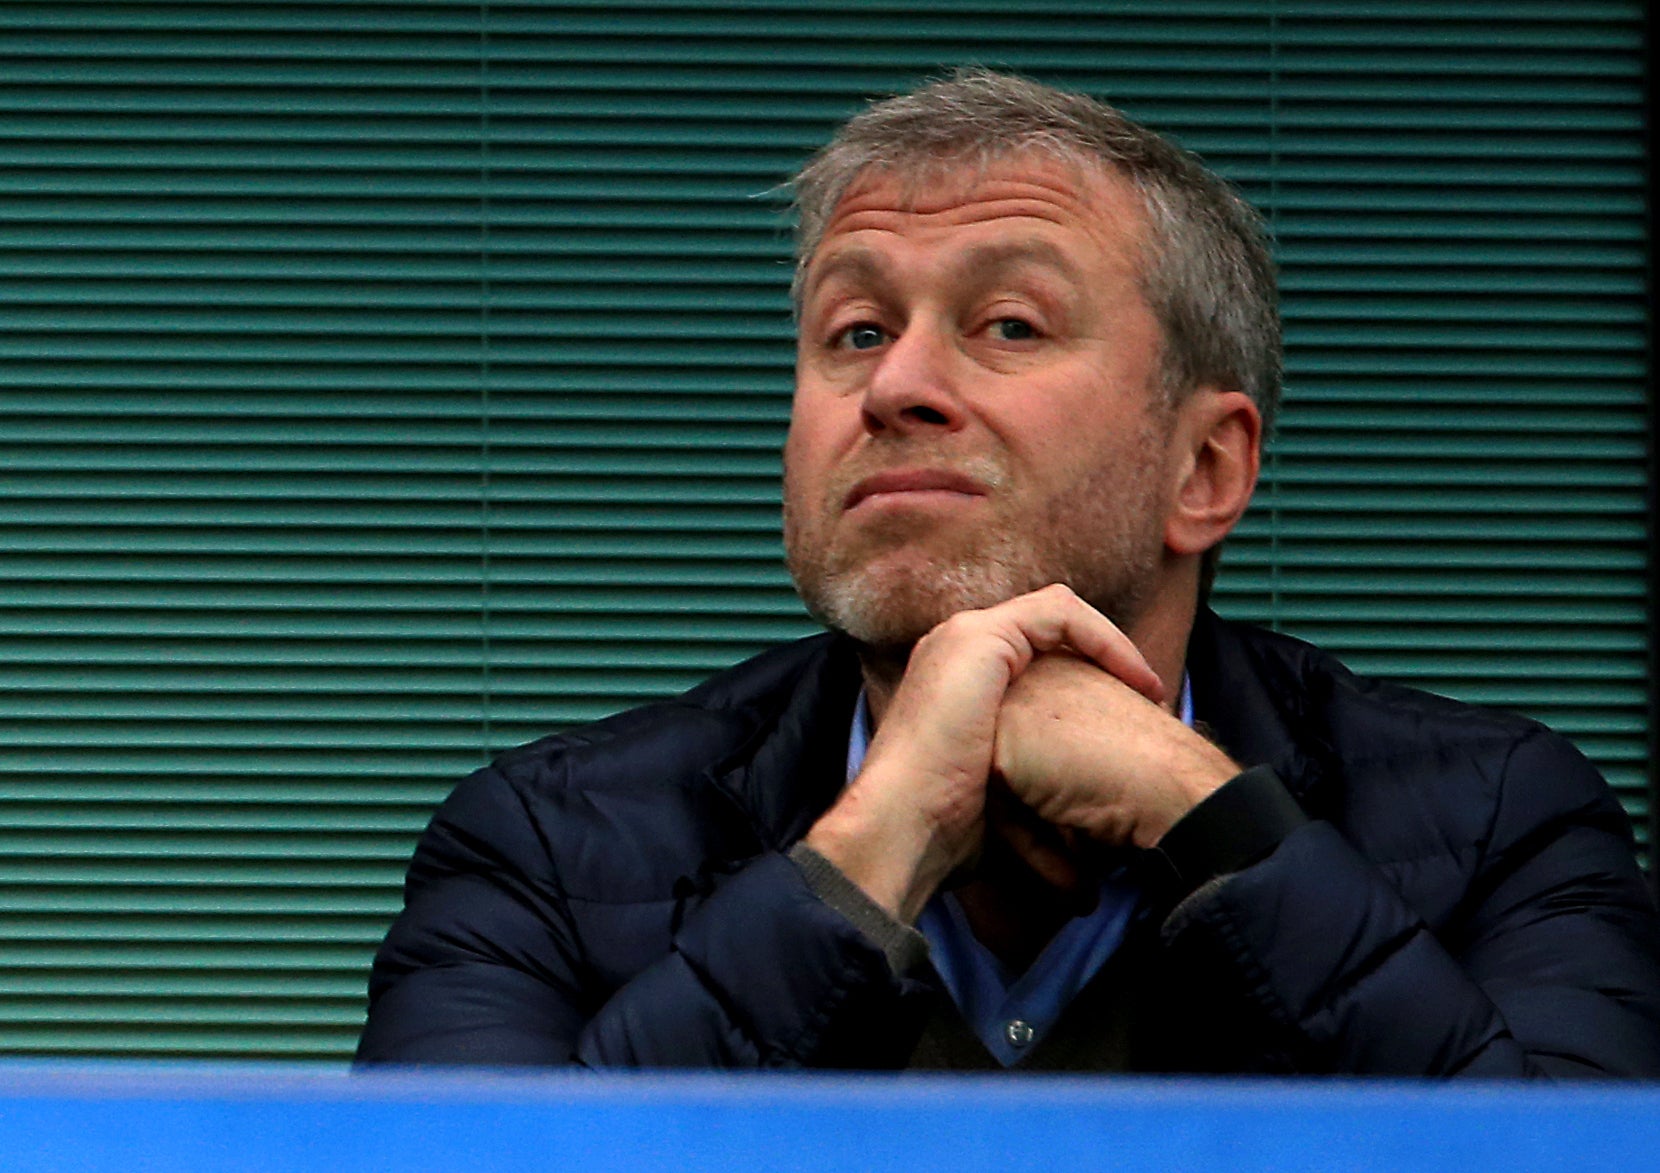 Roman Abramovich suffered suspected poisoning during attempts to aid peace talks in Ukraine (Adam Davy/PA)